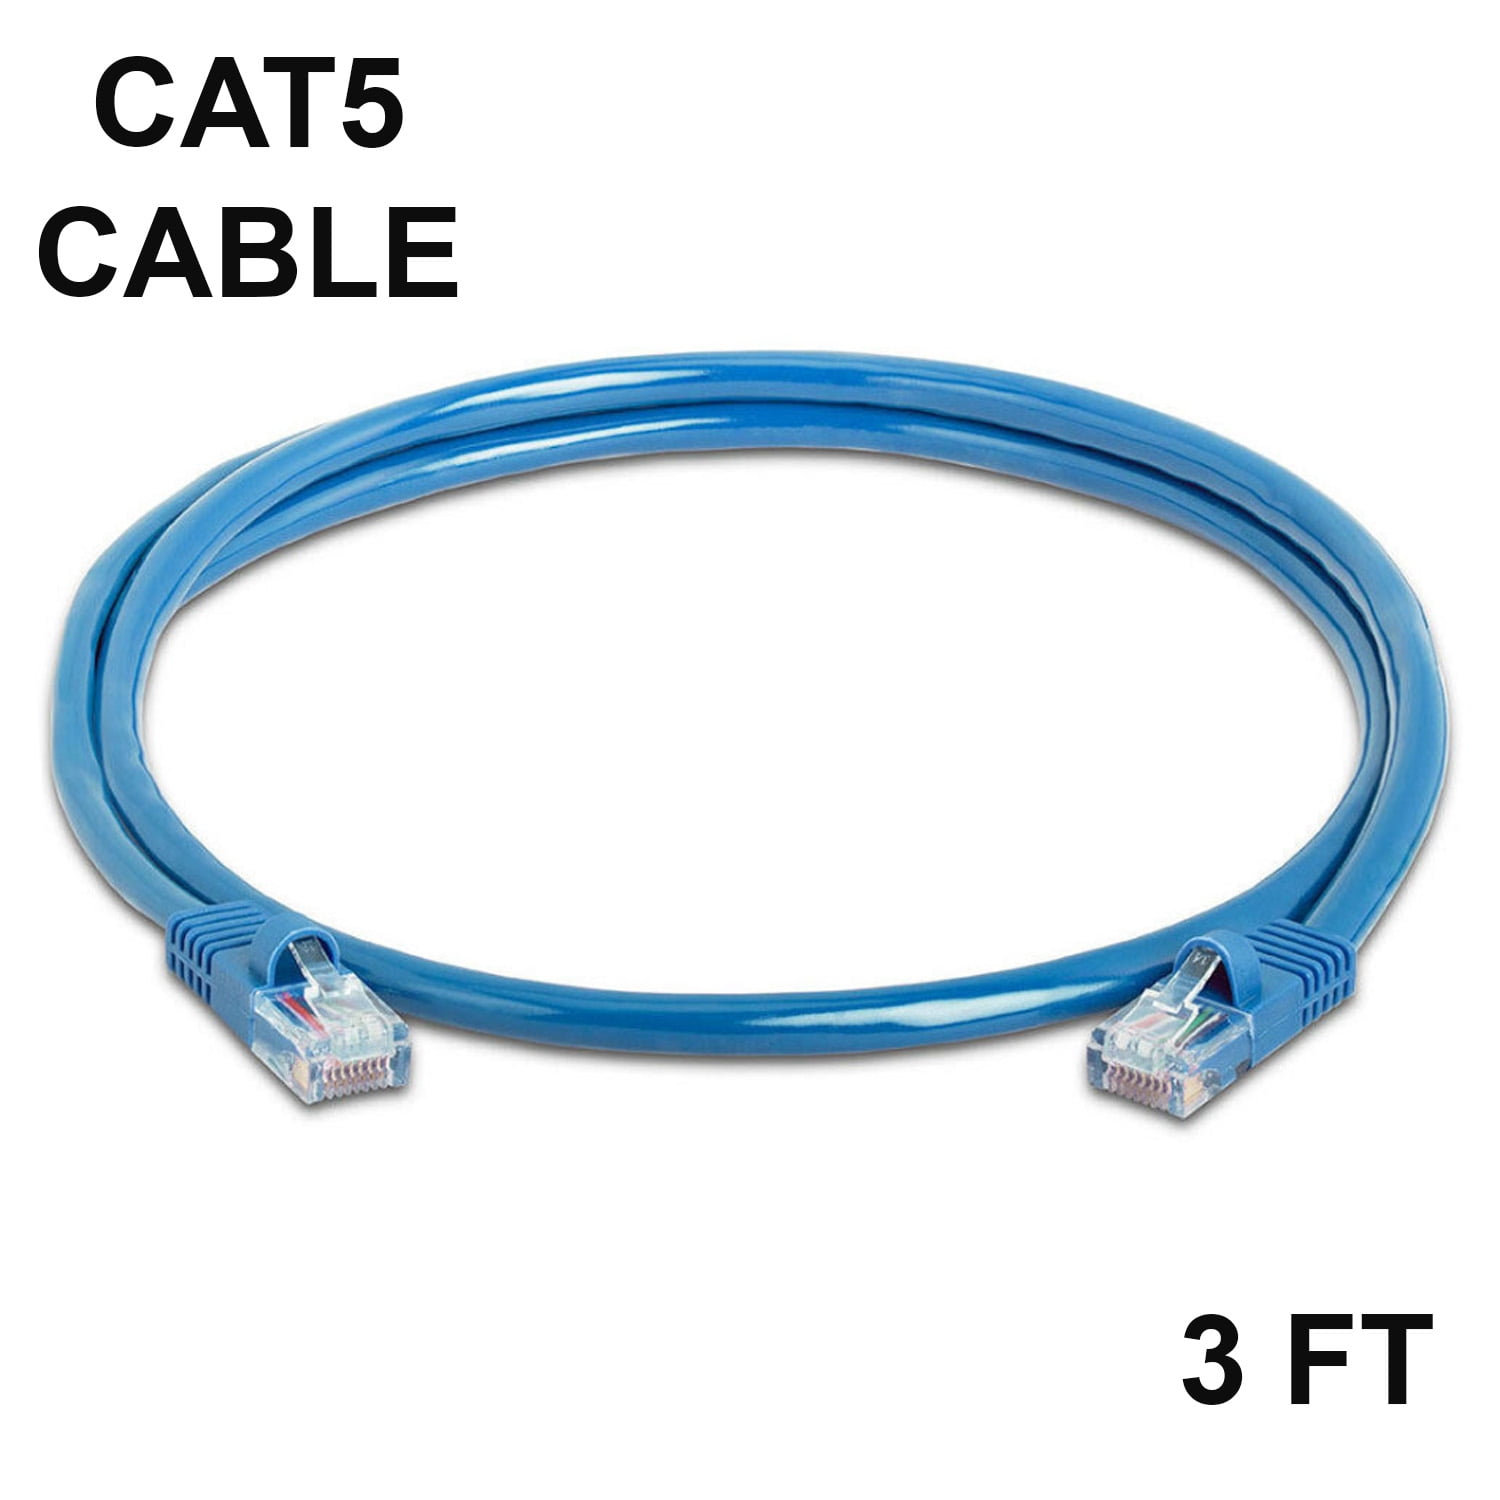 25 ft feet Cat5 Cable CAT5E RJ45 LAN Network Ethernet Router Switch Grey Cord 